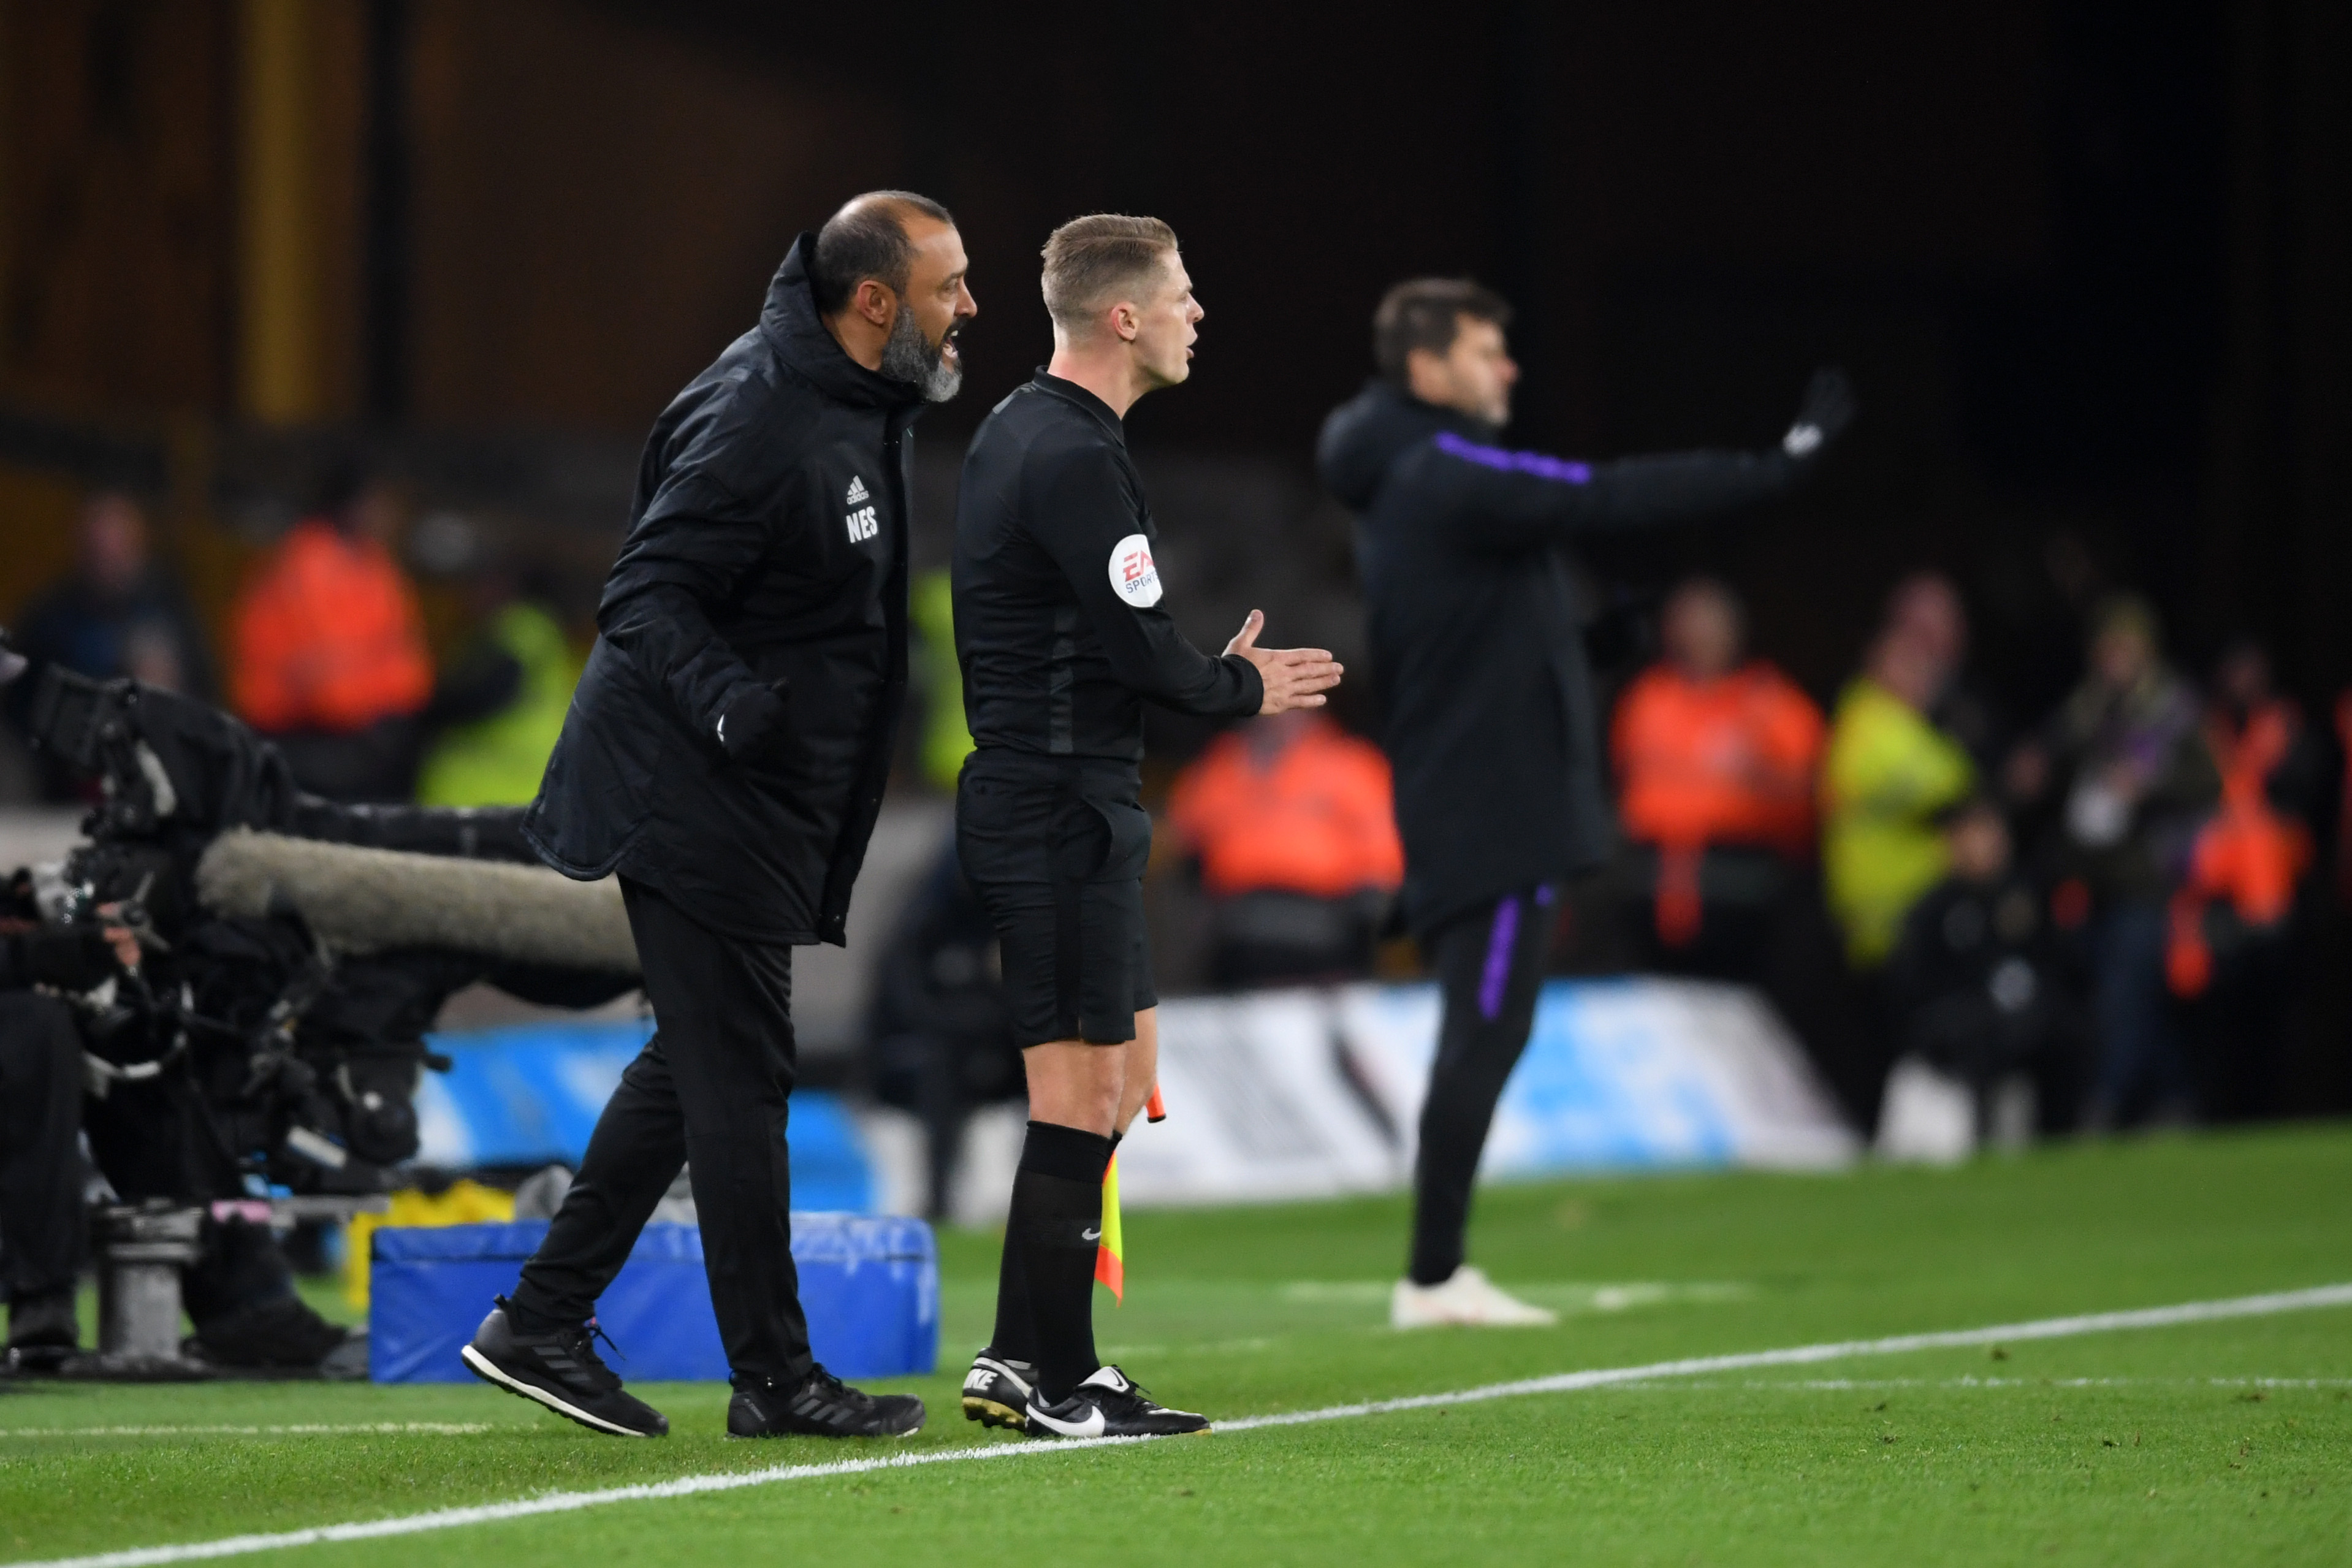 WOLVERHAMPTON, ENGLAND - NOVEMBER 03:  Nuno Espirito Santo, Manager of Wolverhampton Wanderers speaks to the linesman during the Premier League match between Wolverhampton Wanderers and Tottenham Hotspur at Molineux on November 3, 2018 in Wolverhampton, United Kingdom.  (Photo by Ross Kinnaird/Getty Images)